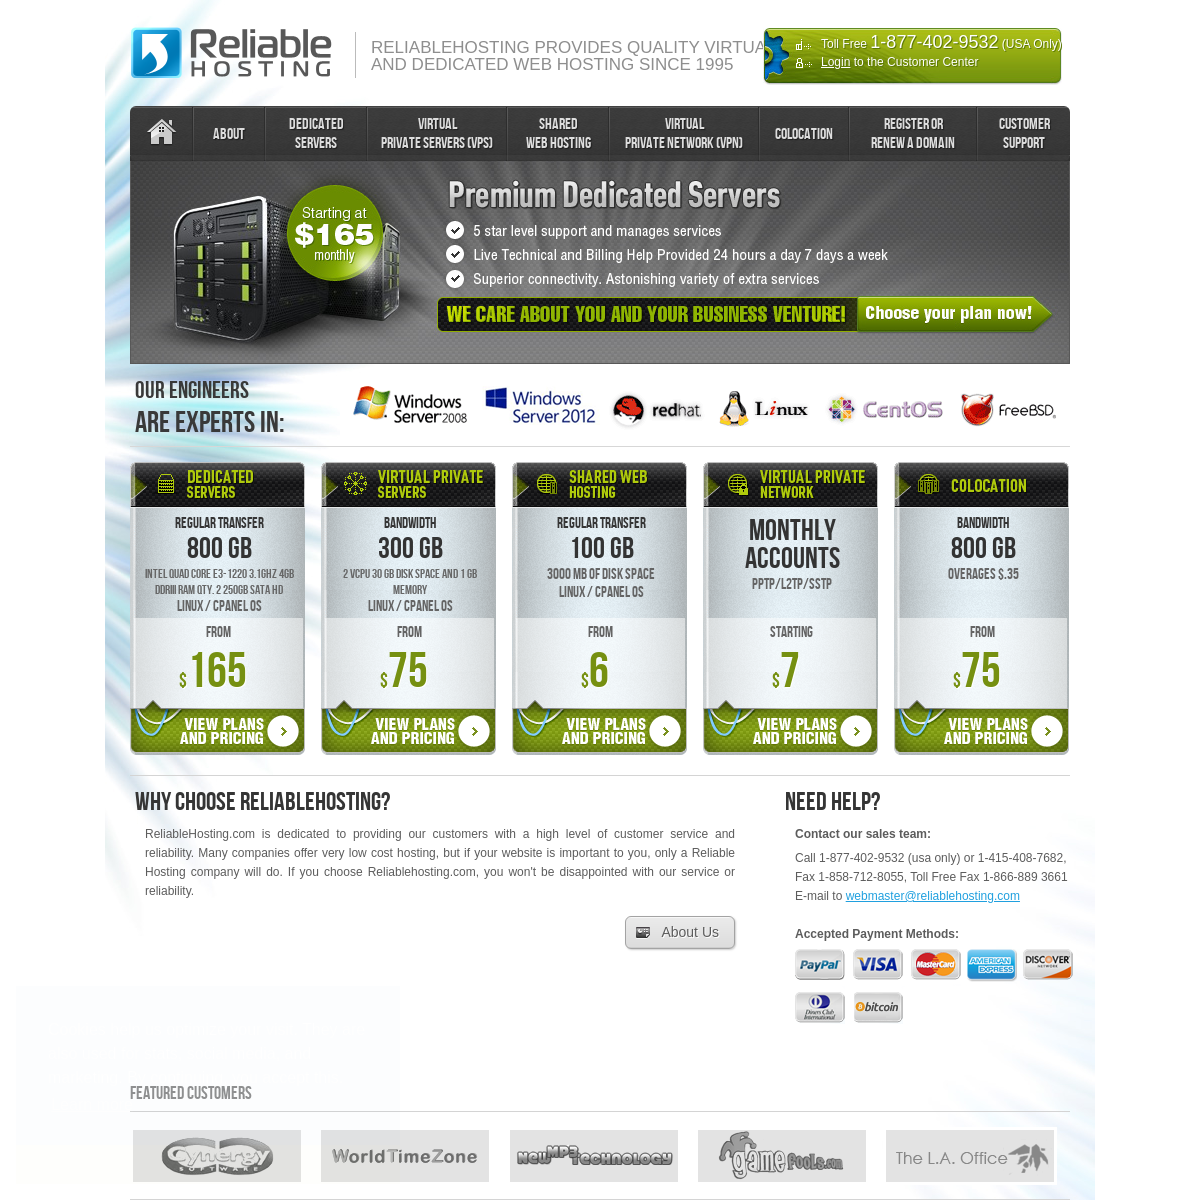 A complete backup of reliablehosting.com